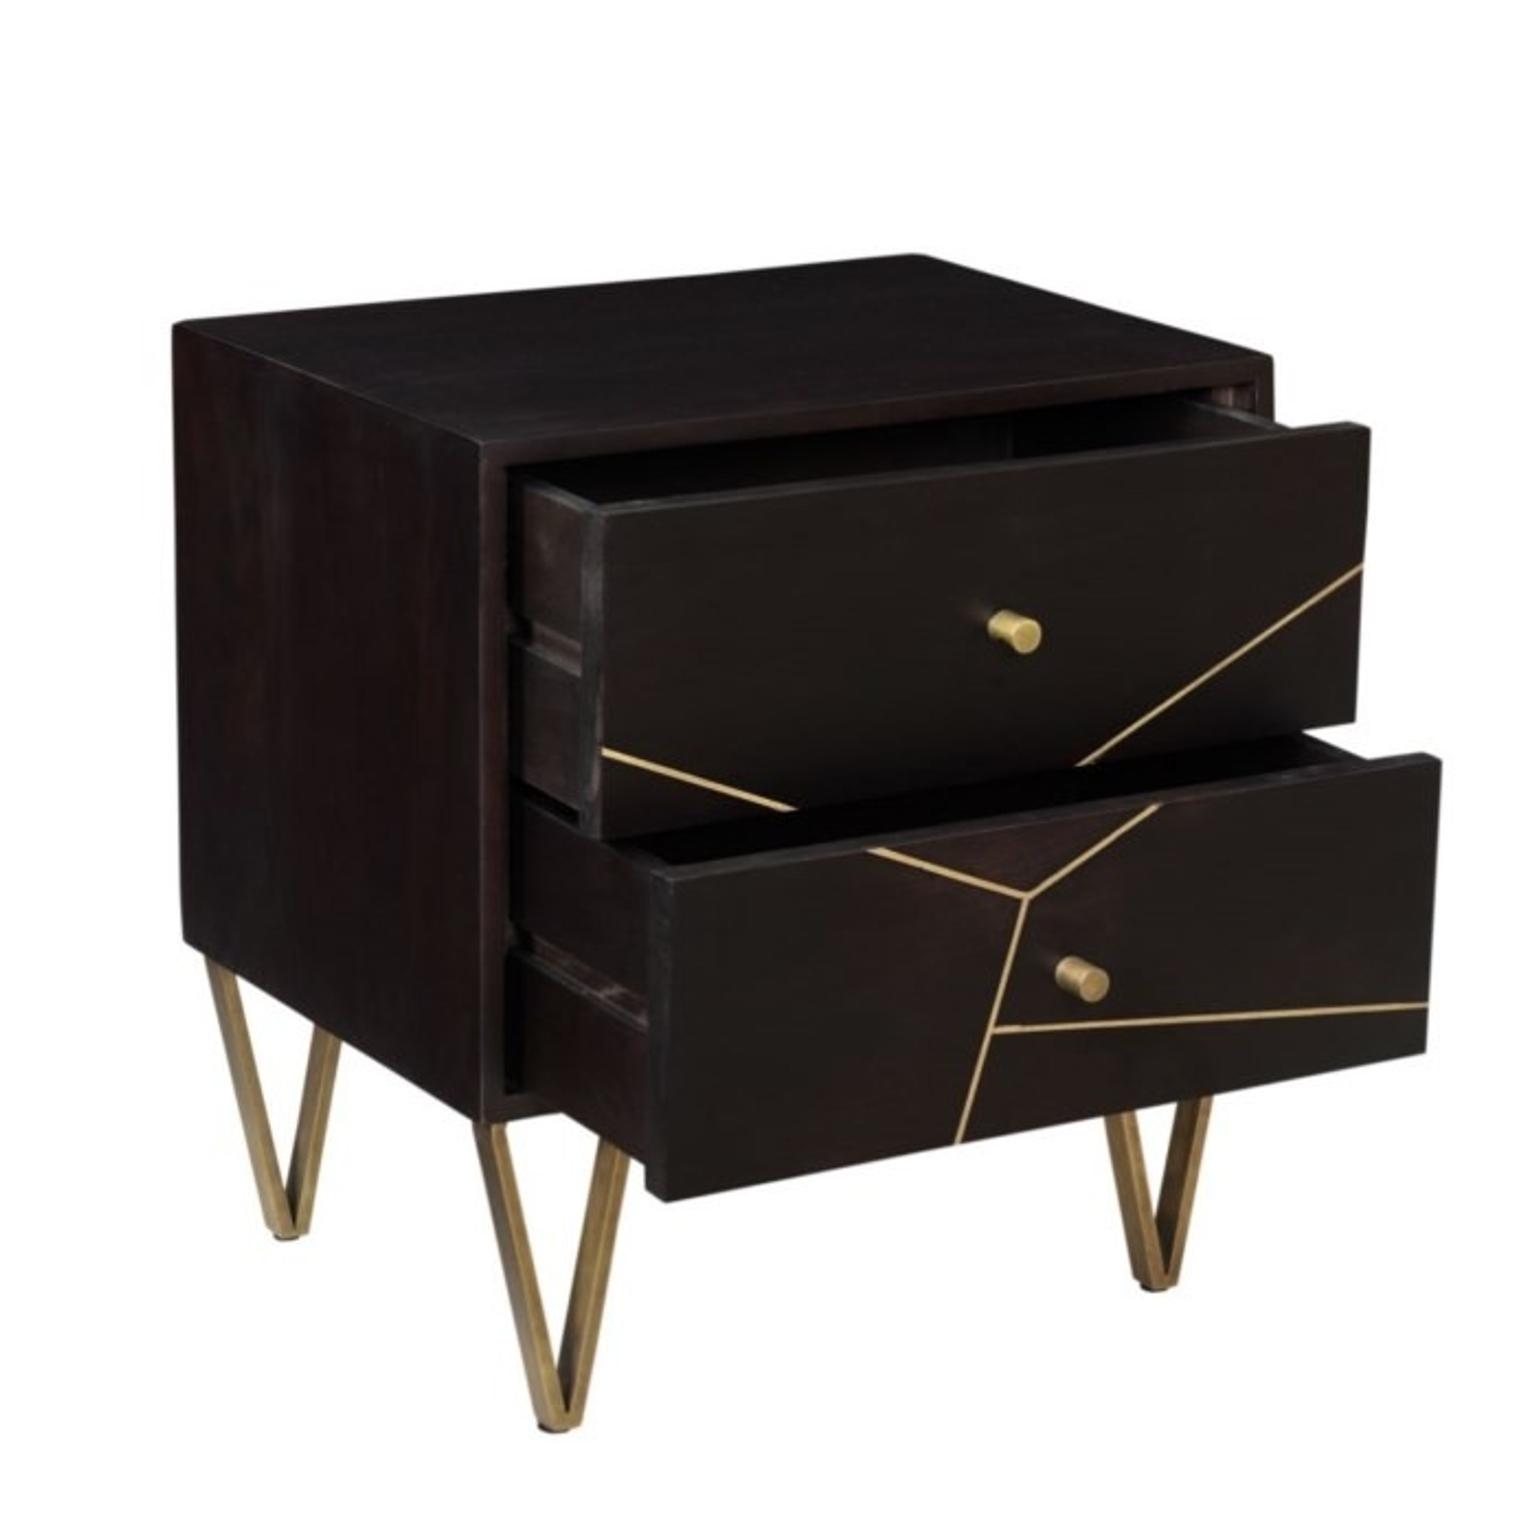 Mika 2 Drawer Bedside Table With Brass Inlay In Hd2 Huddersfield